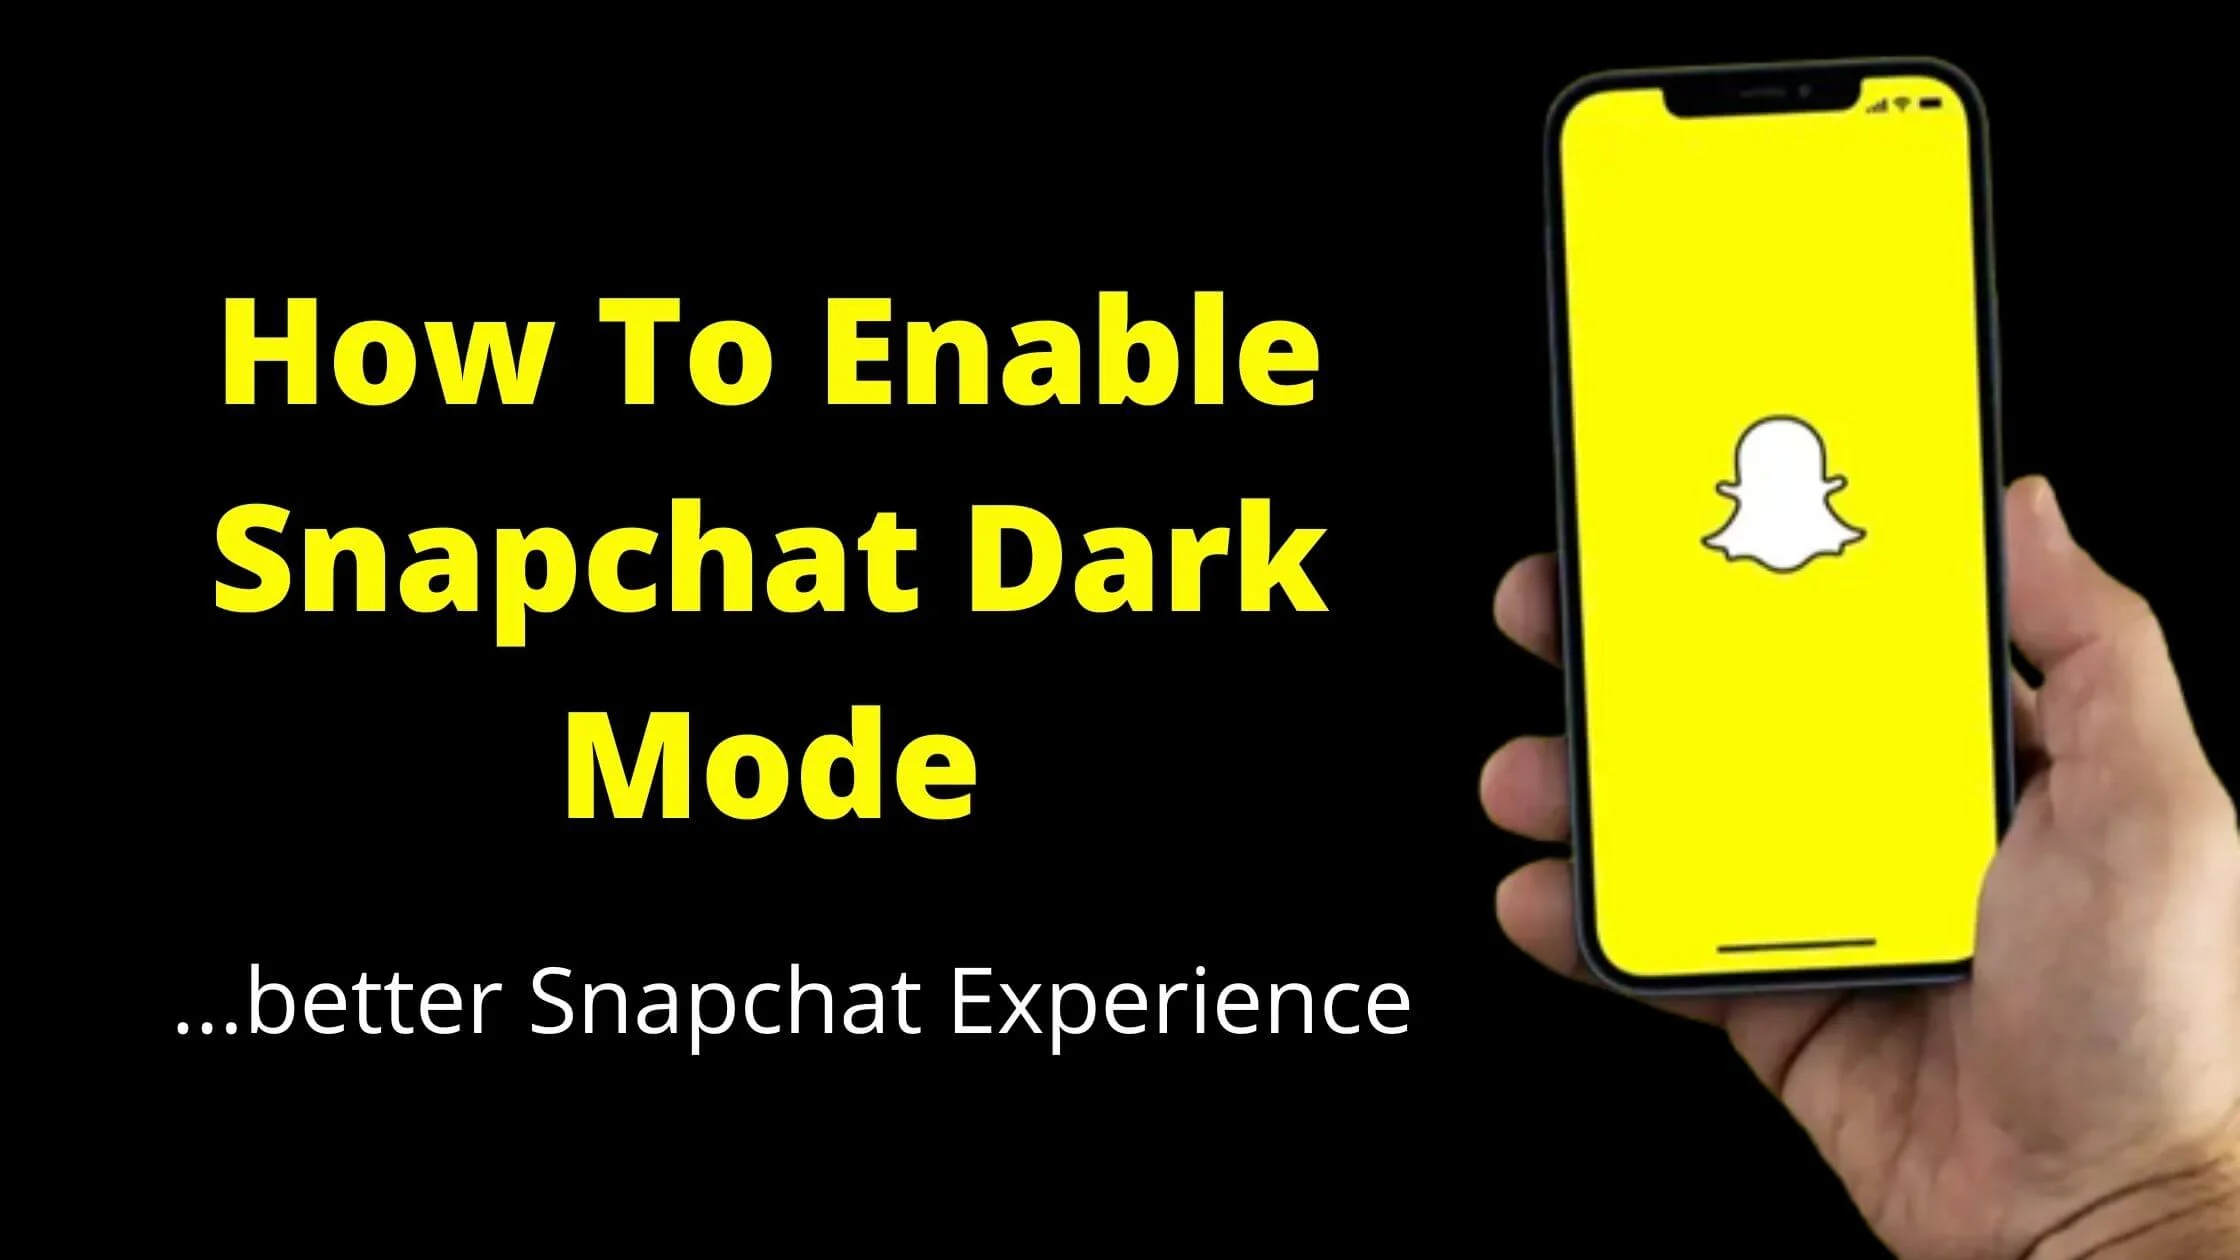 How To Enable Snapchat Dark Mode